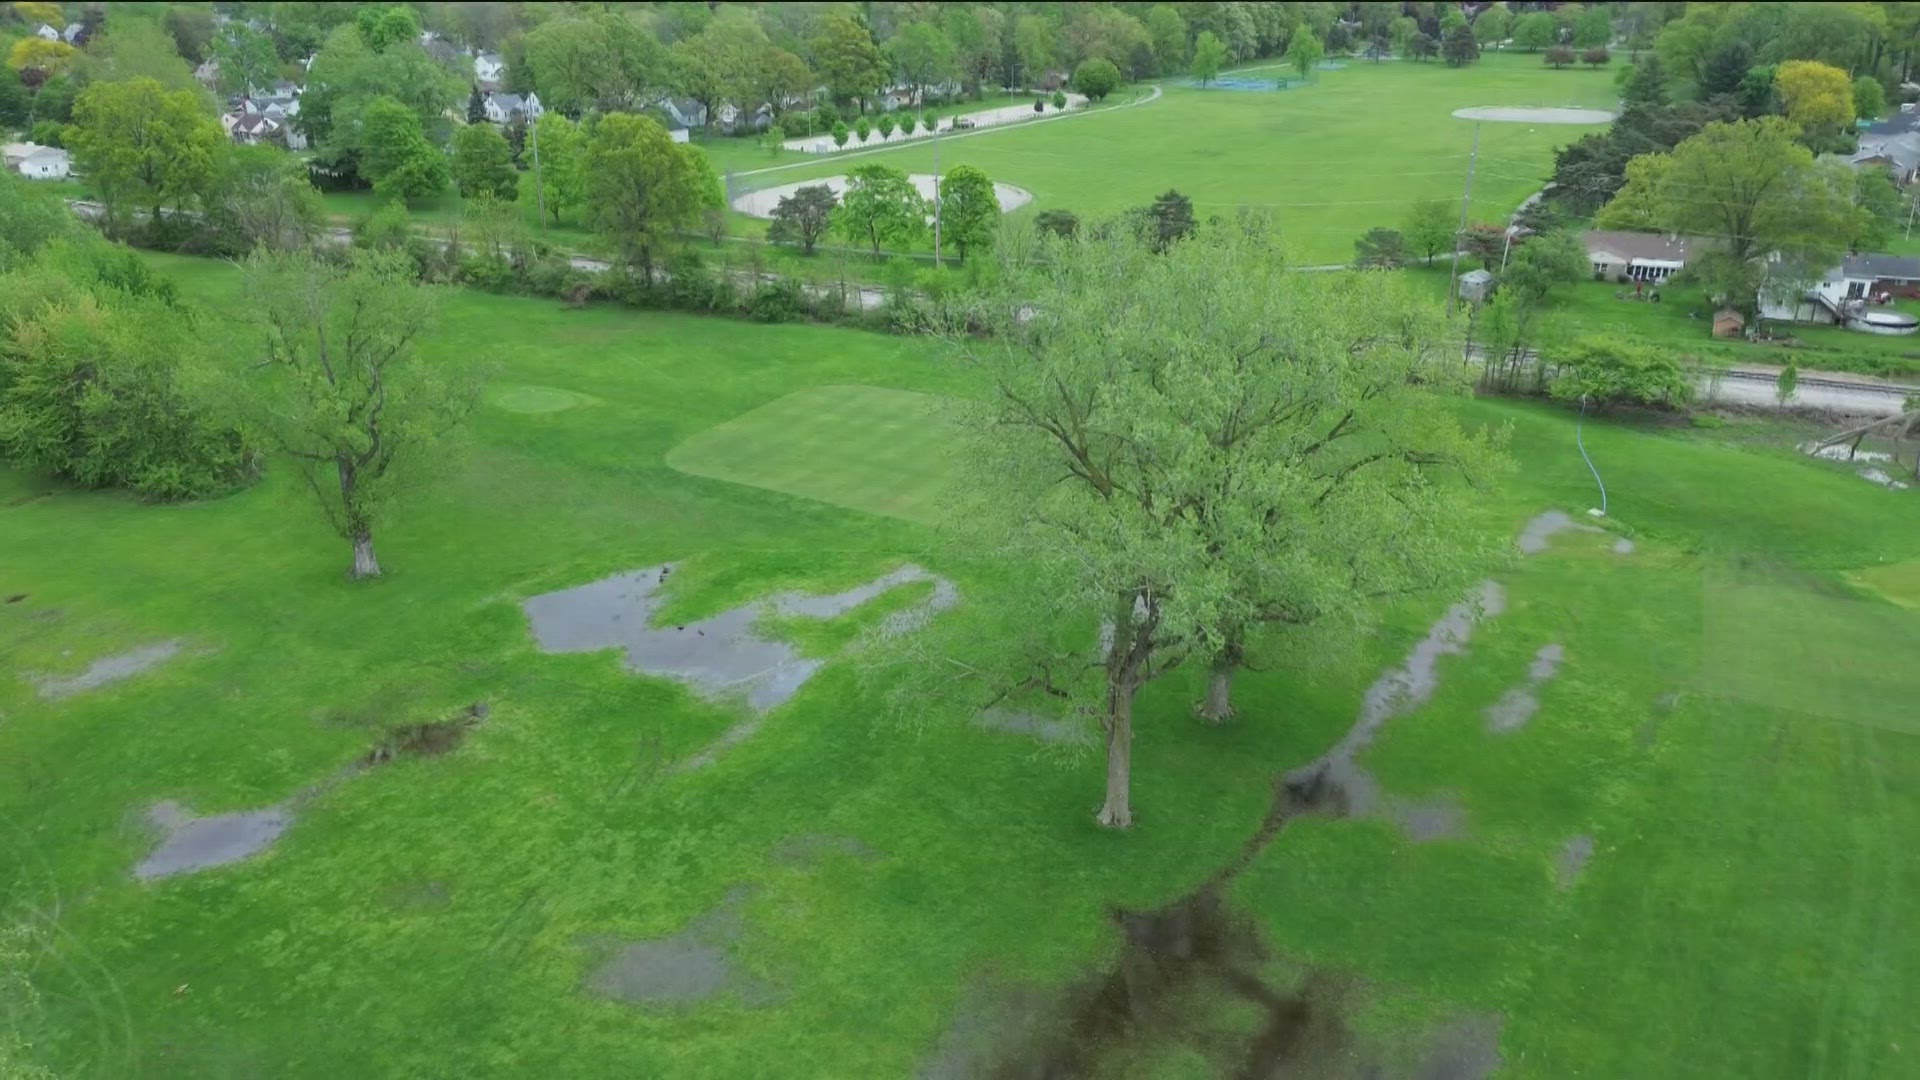 A south Toledo golf course has closed a few times due to soggy conditions from record-breaking rain in our area, but crews are doing their best to keep it open.